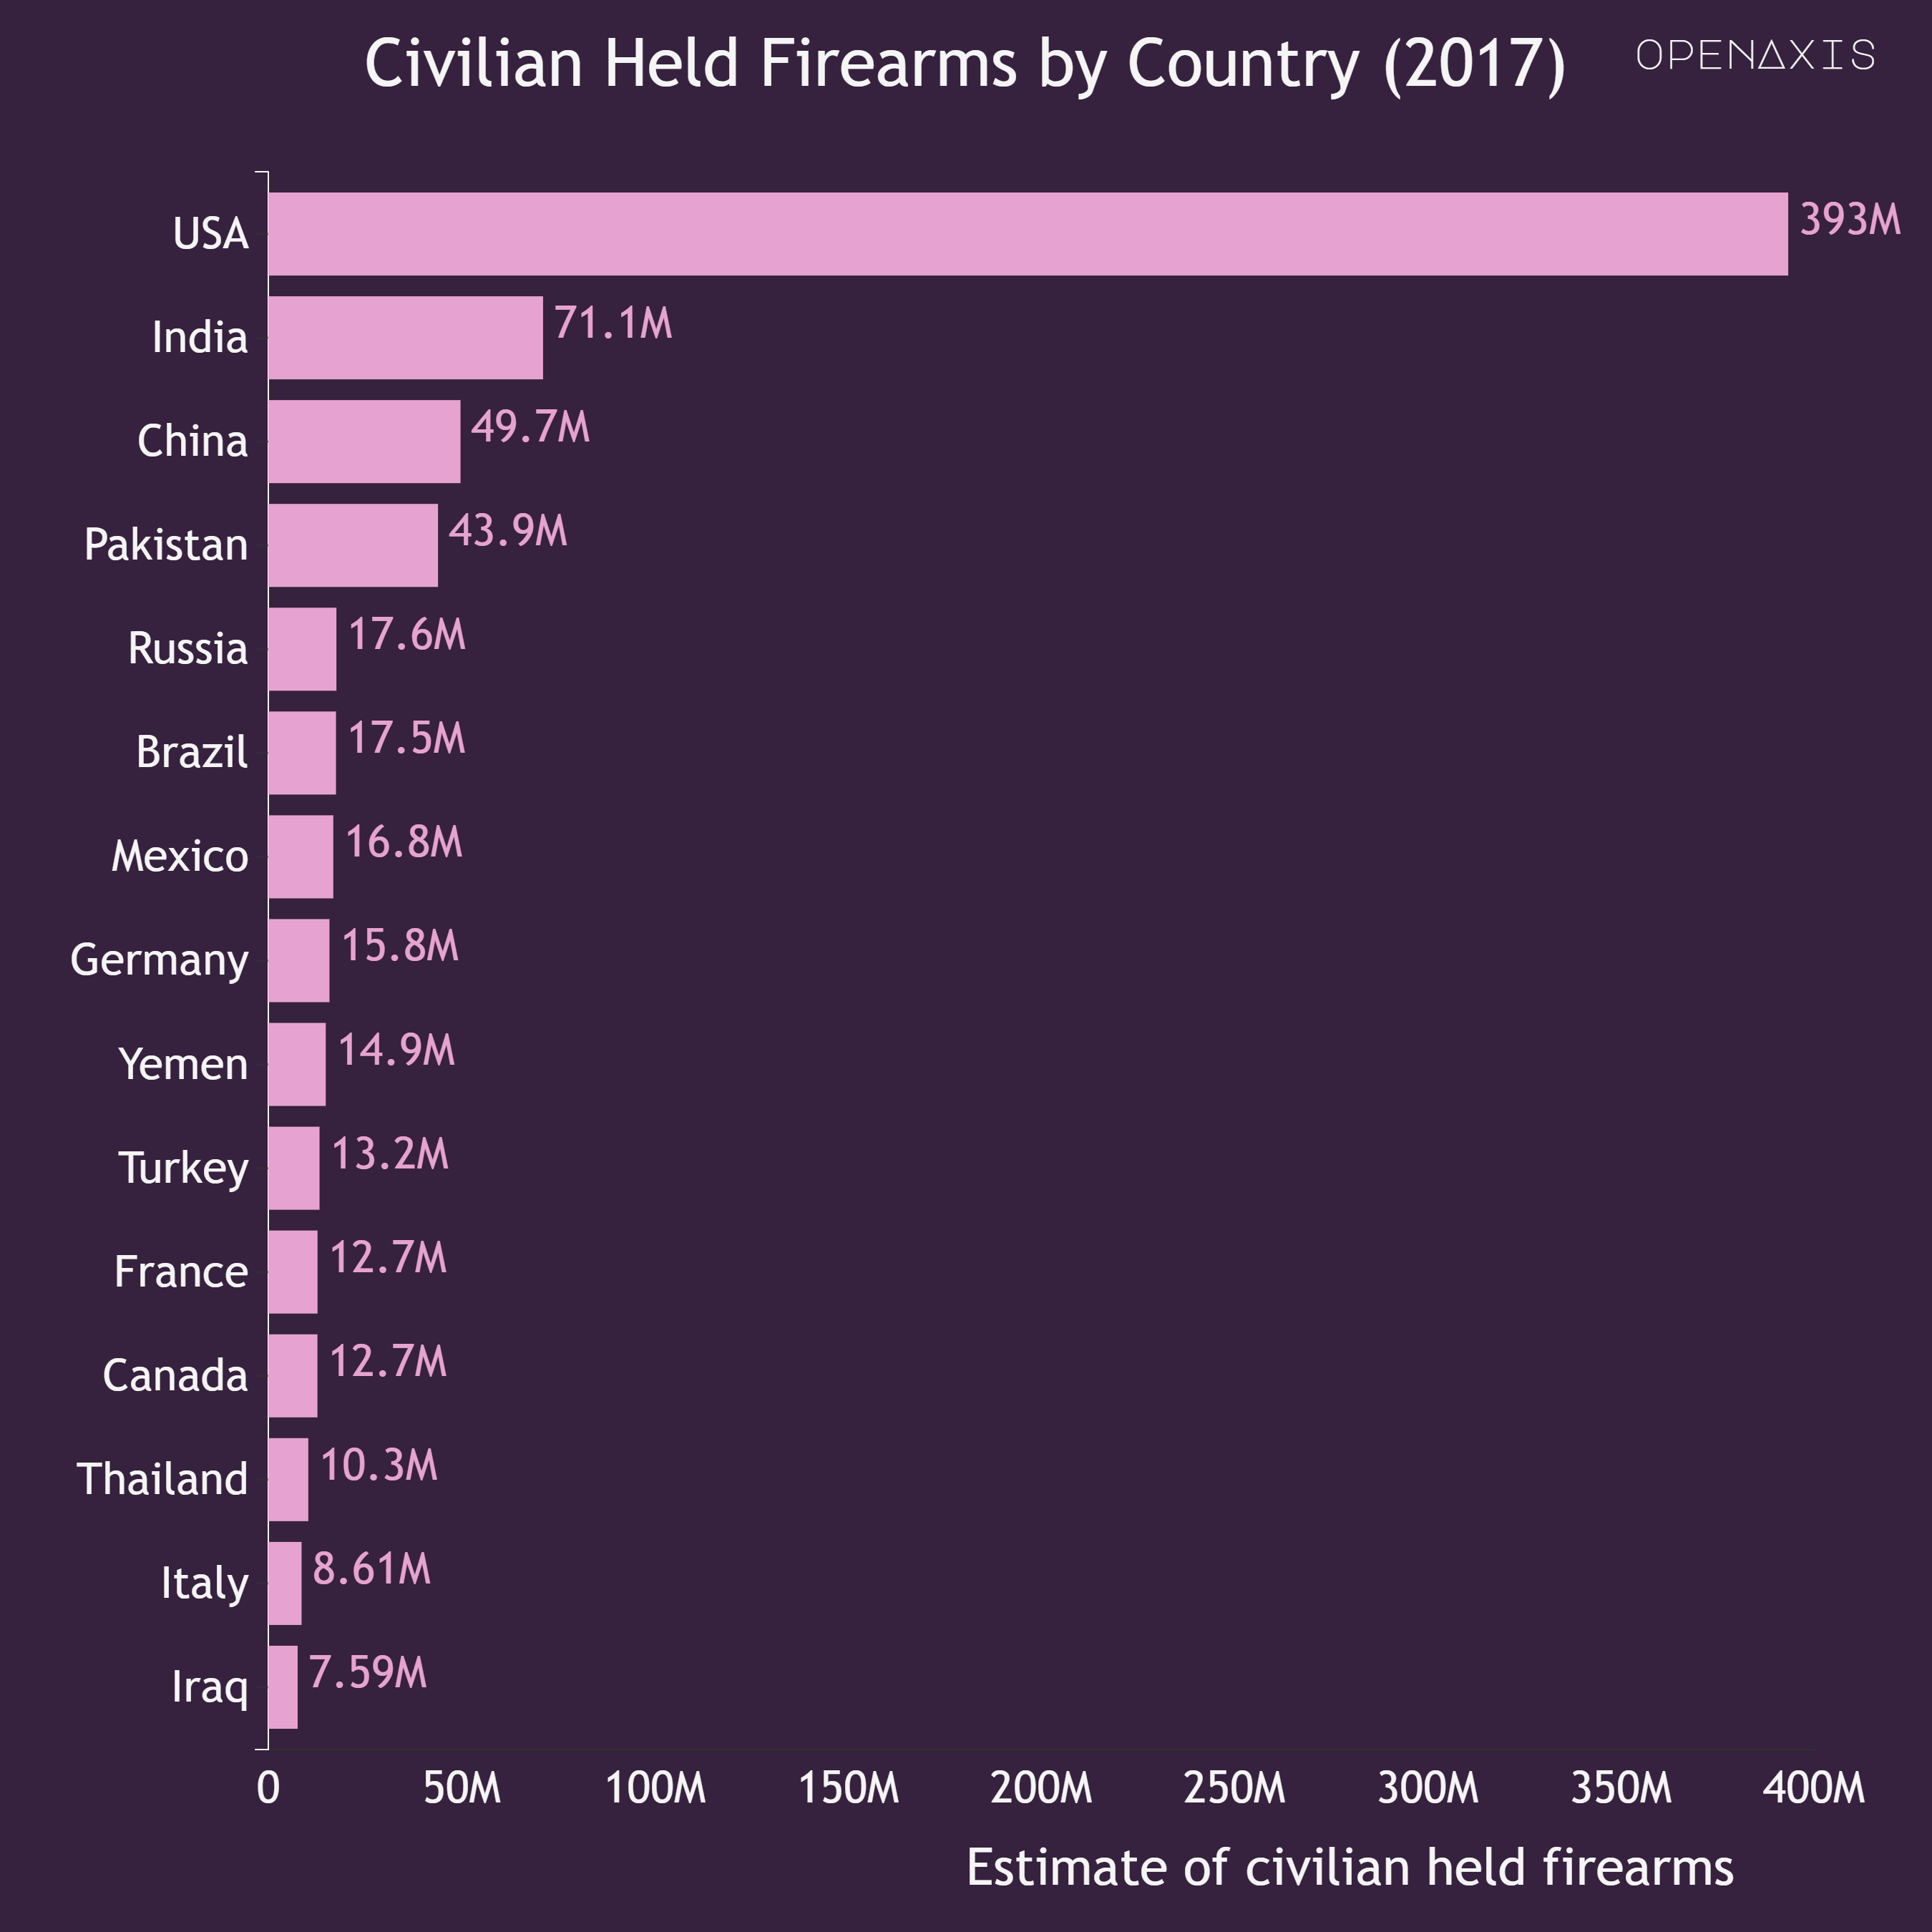 "Civilian Held Firearms by Country (2017)"